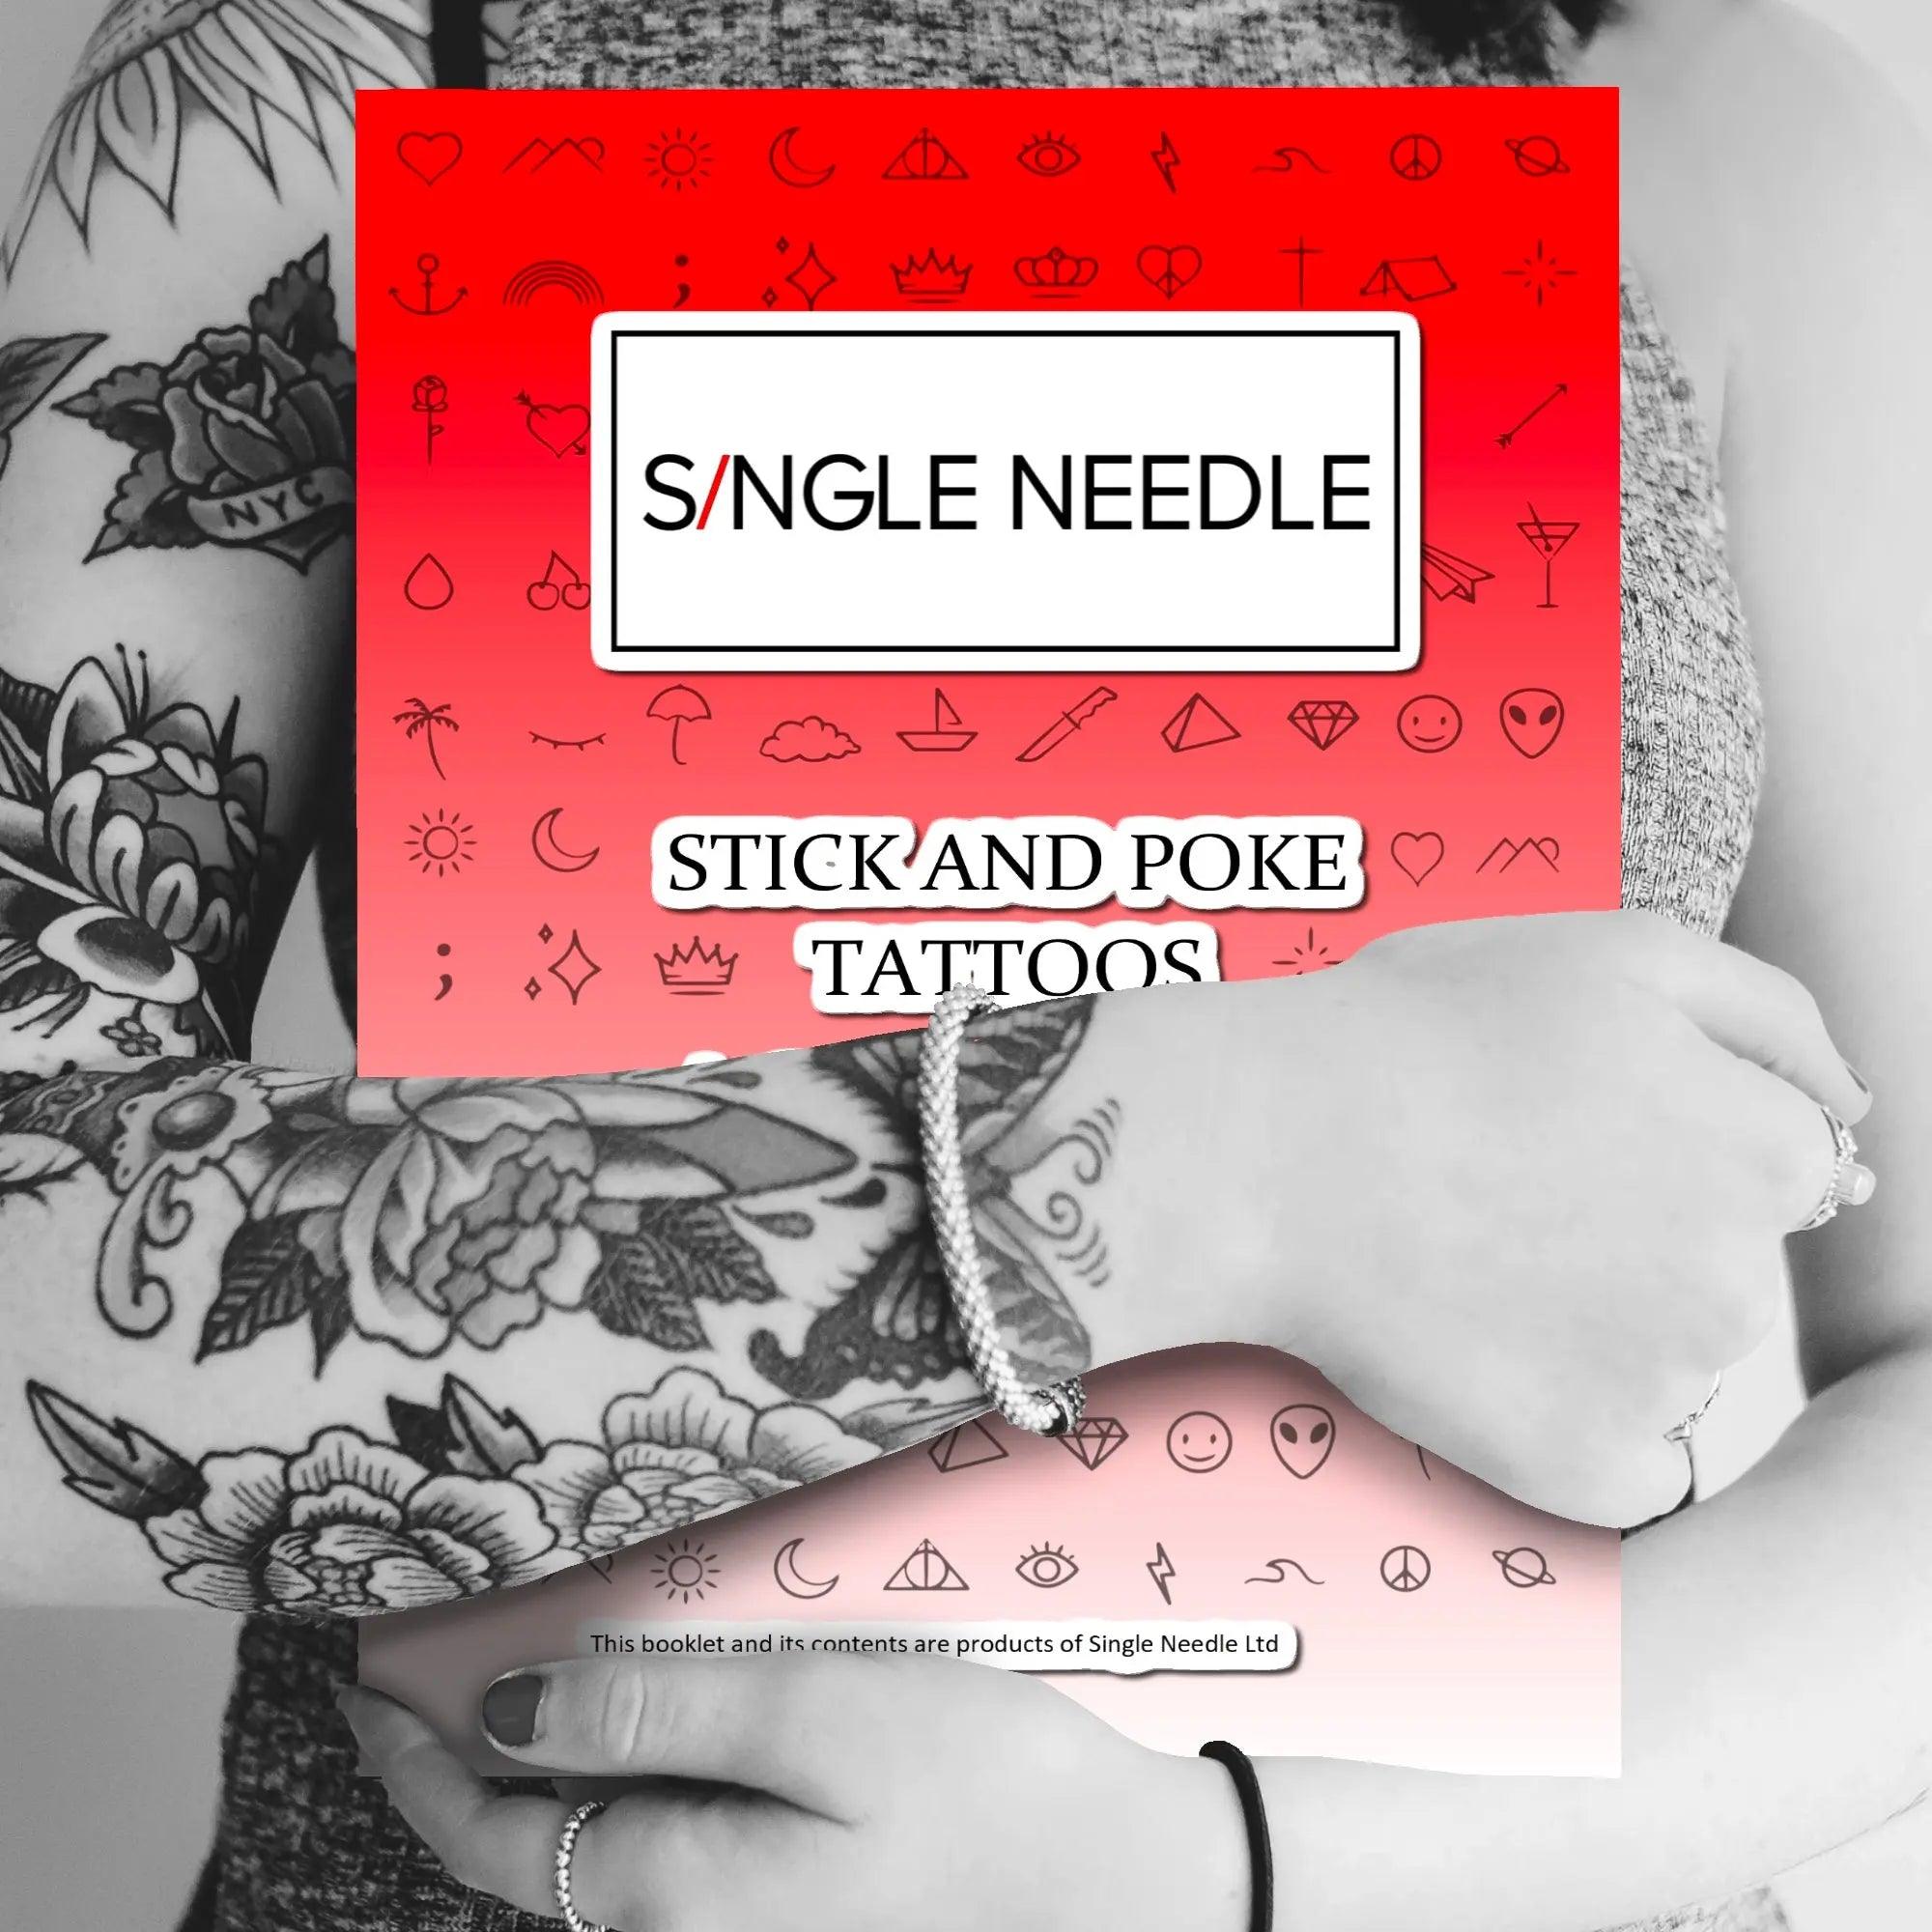 Stick and Poke Tattoo Guide for use of Practice Kits - SINGLE NEEDLE